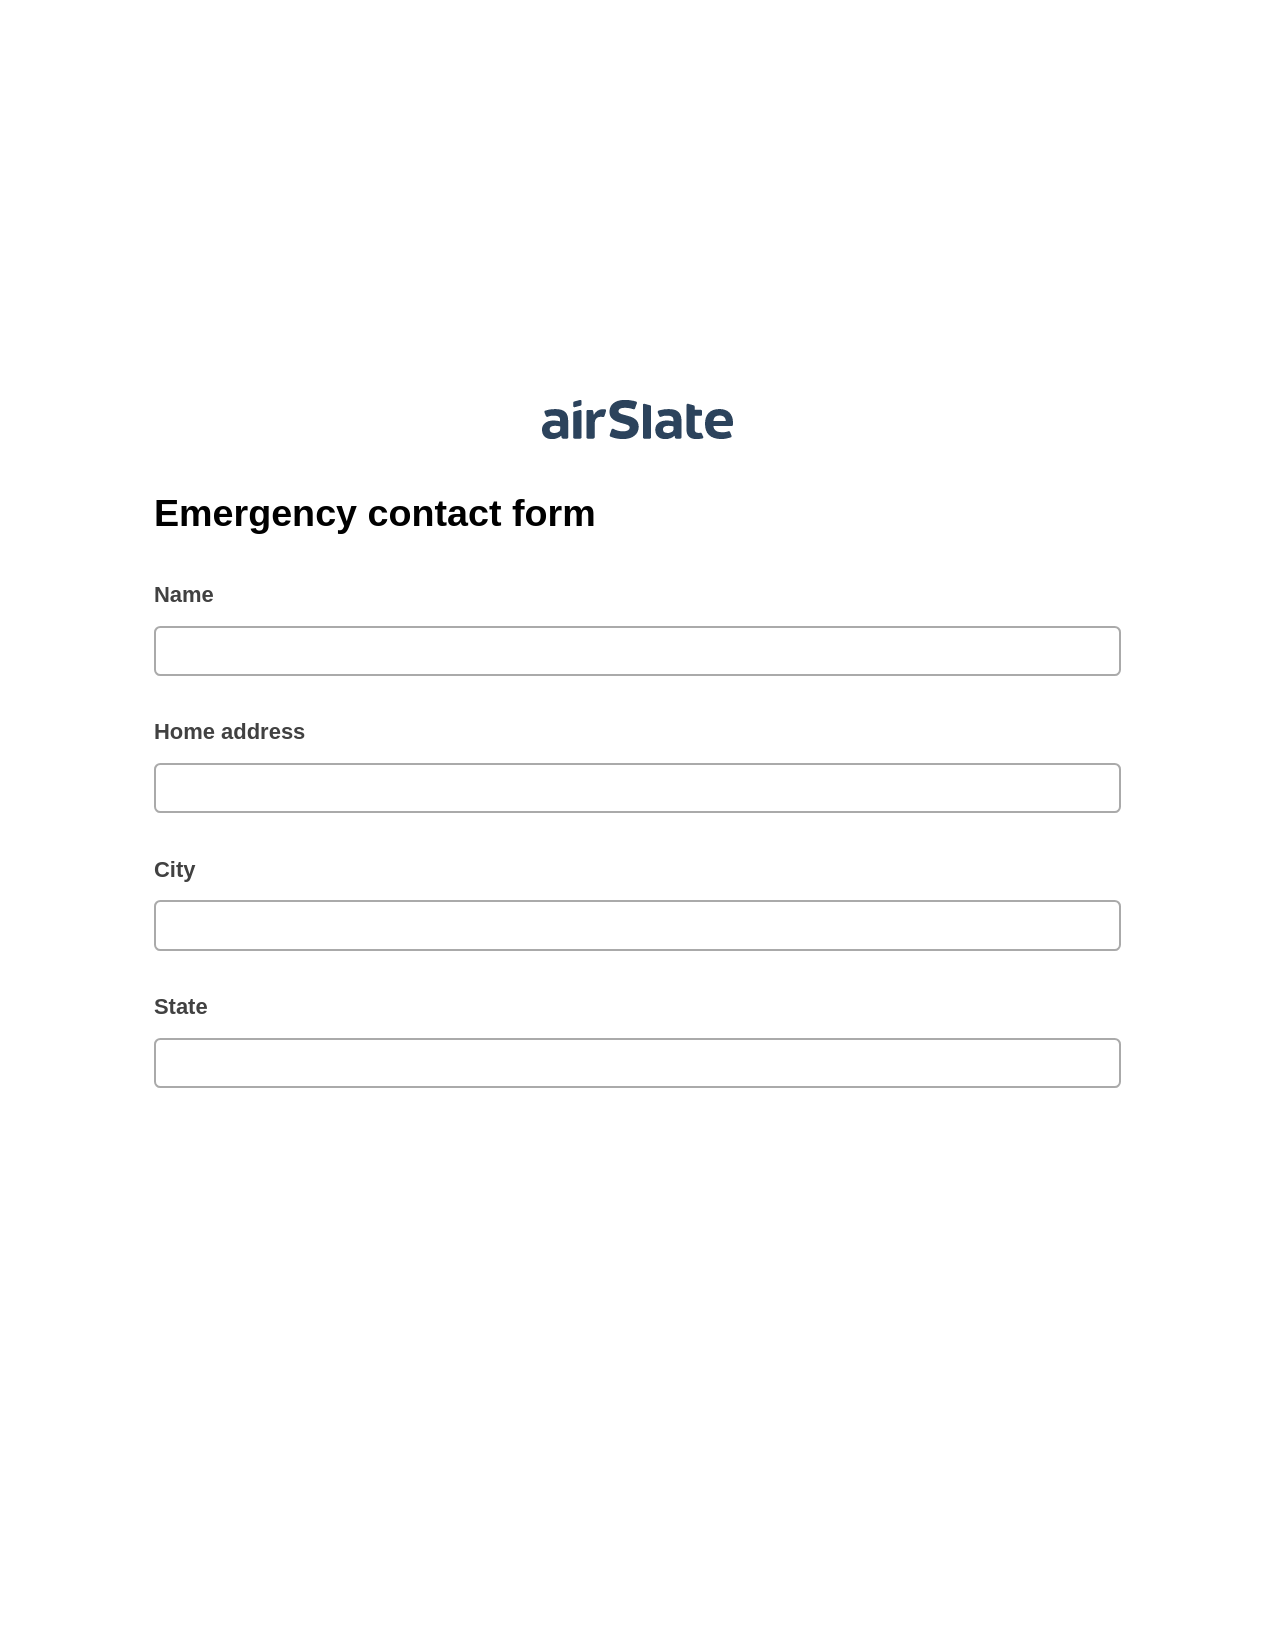 Multirole Emergency contact form Pre-fill Dropdown from Airtable, SendGrid send Campaign bot, OneDrive Bot